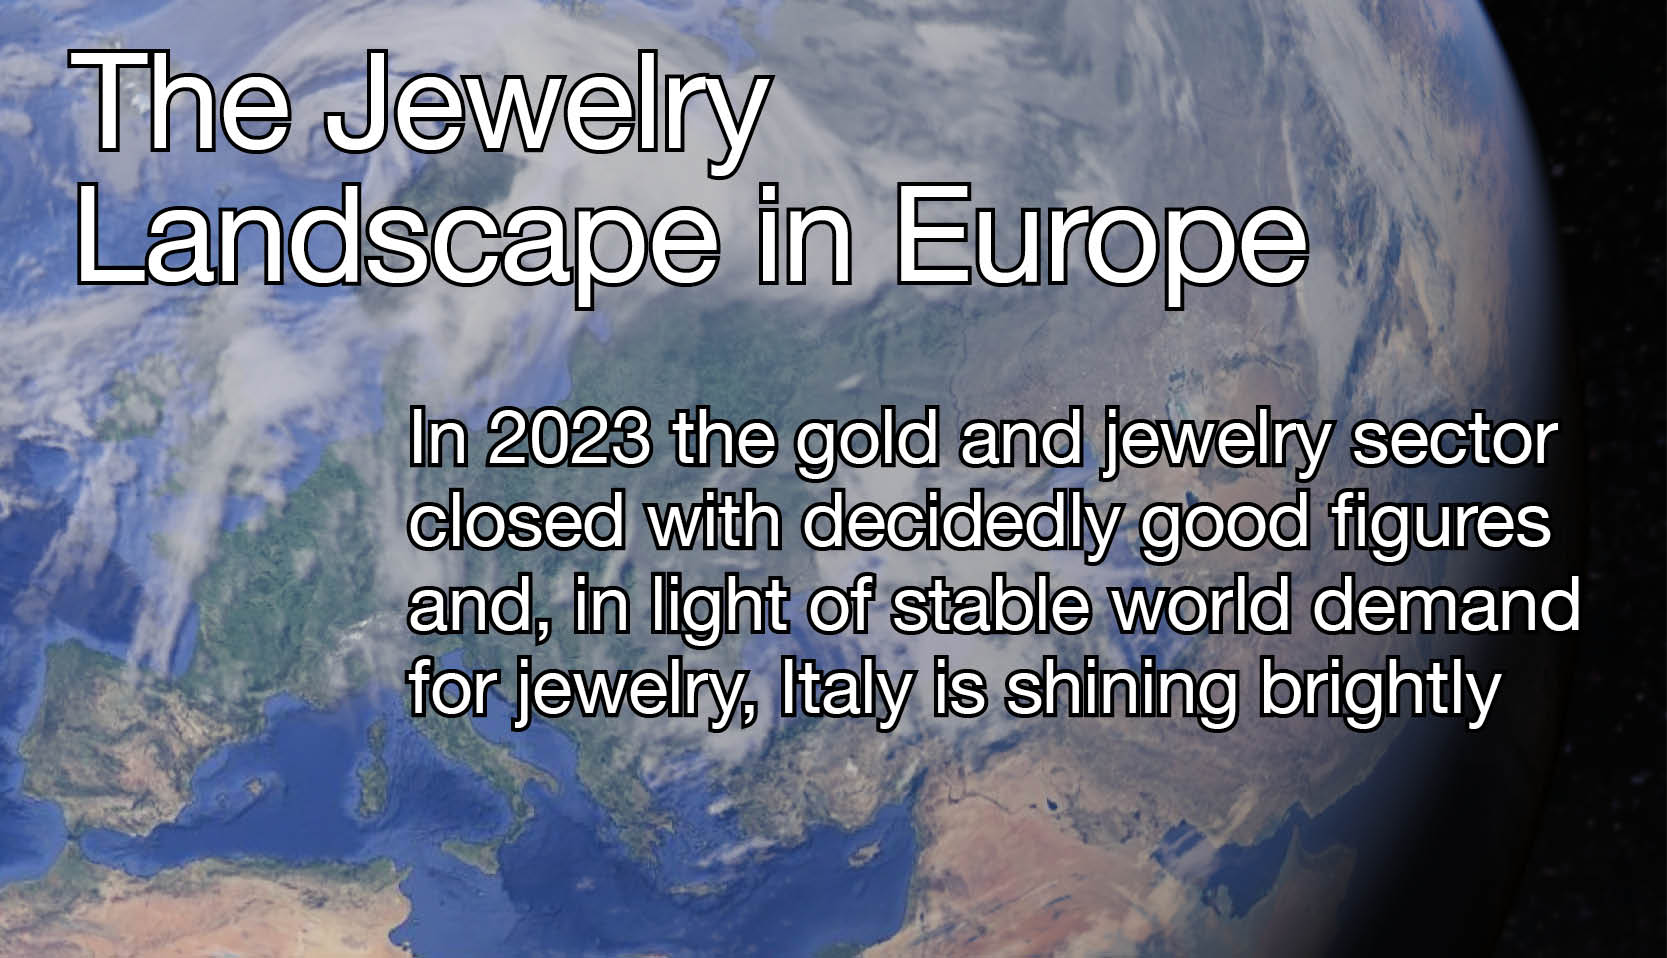 The Jewelry Landscape in Europe